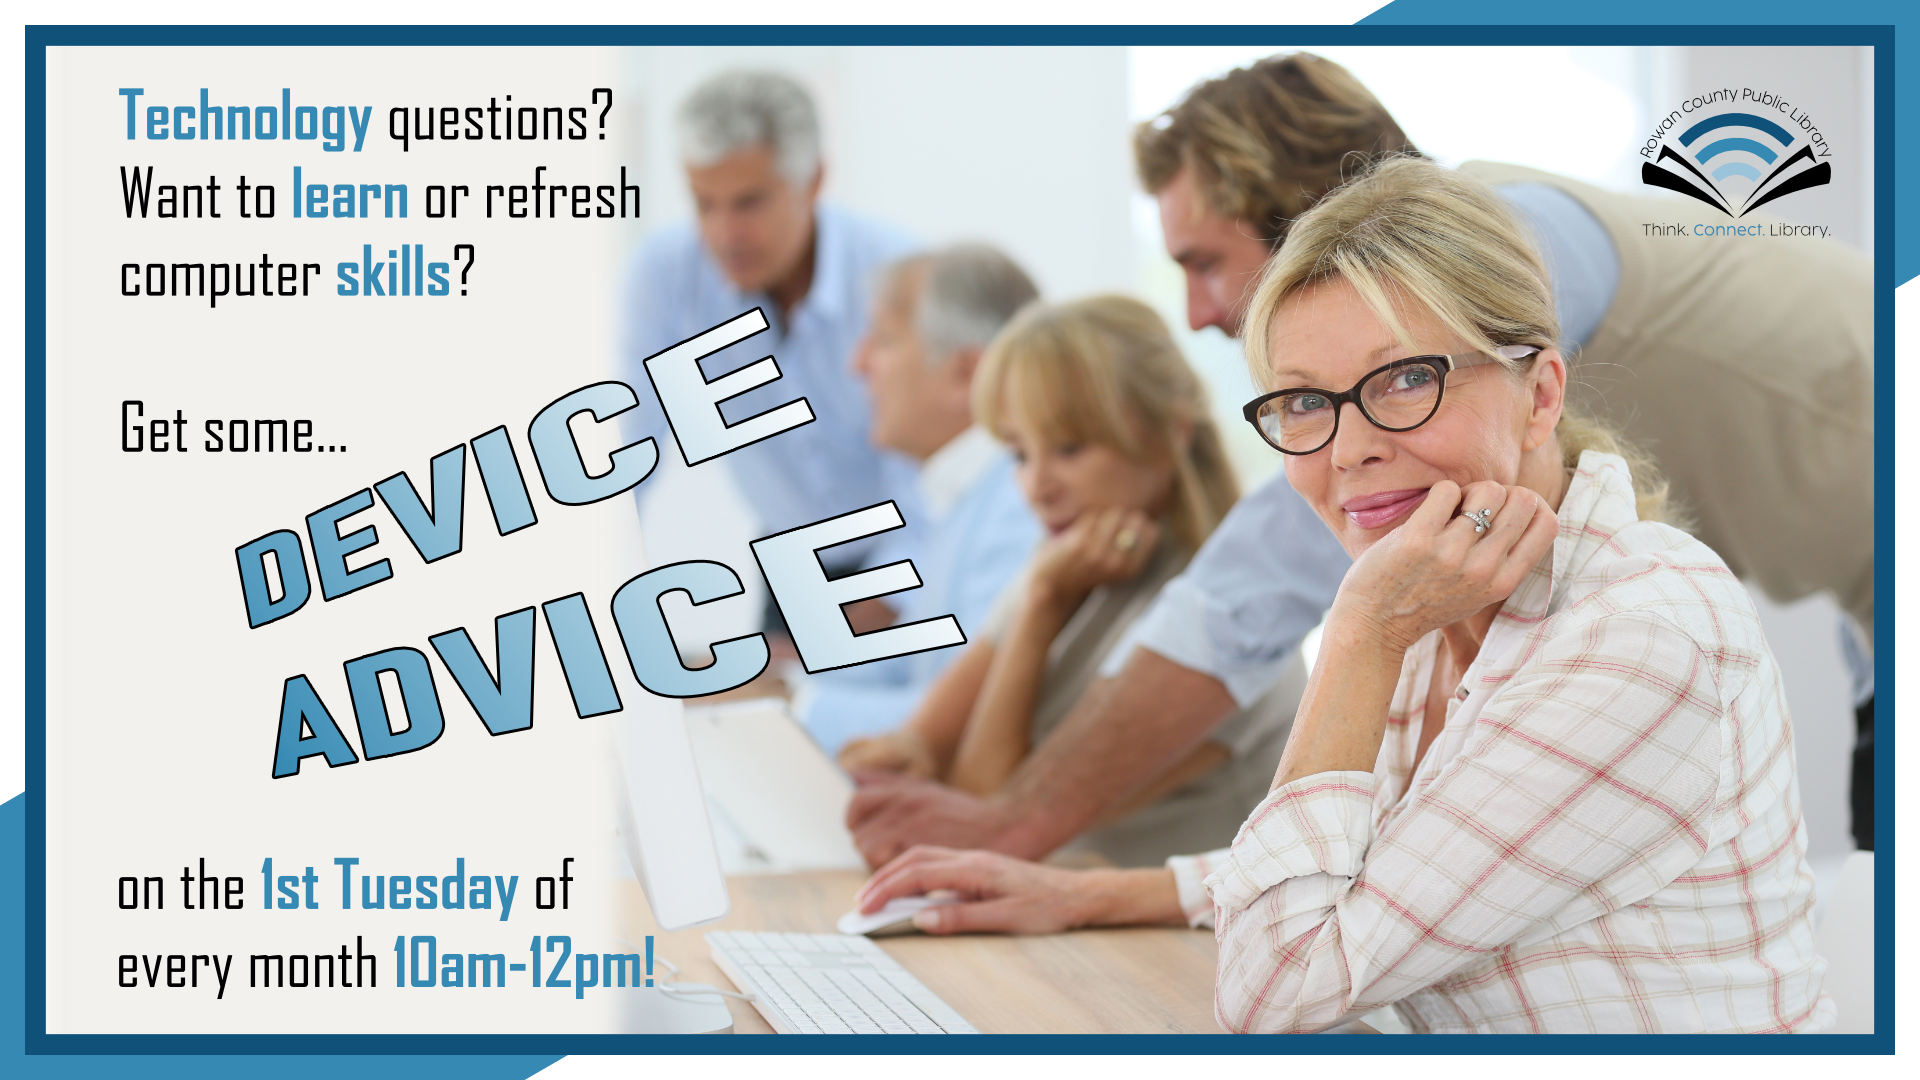 Device Advice, first Tuesday monthly at 10am, intended for adults 18+